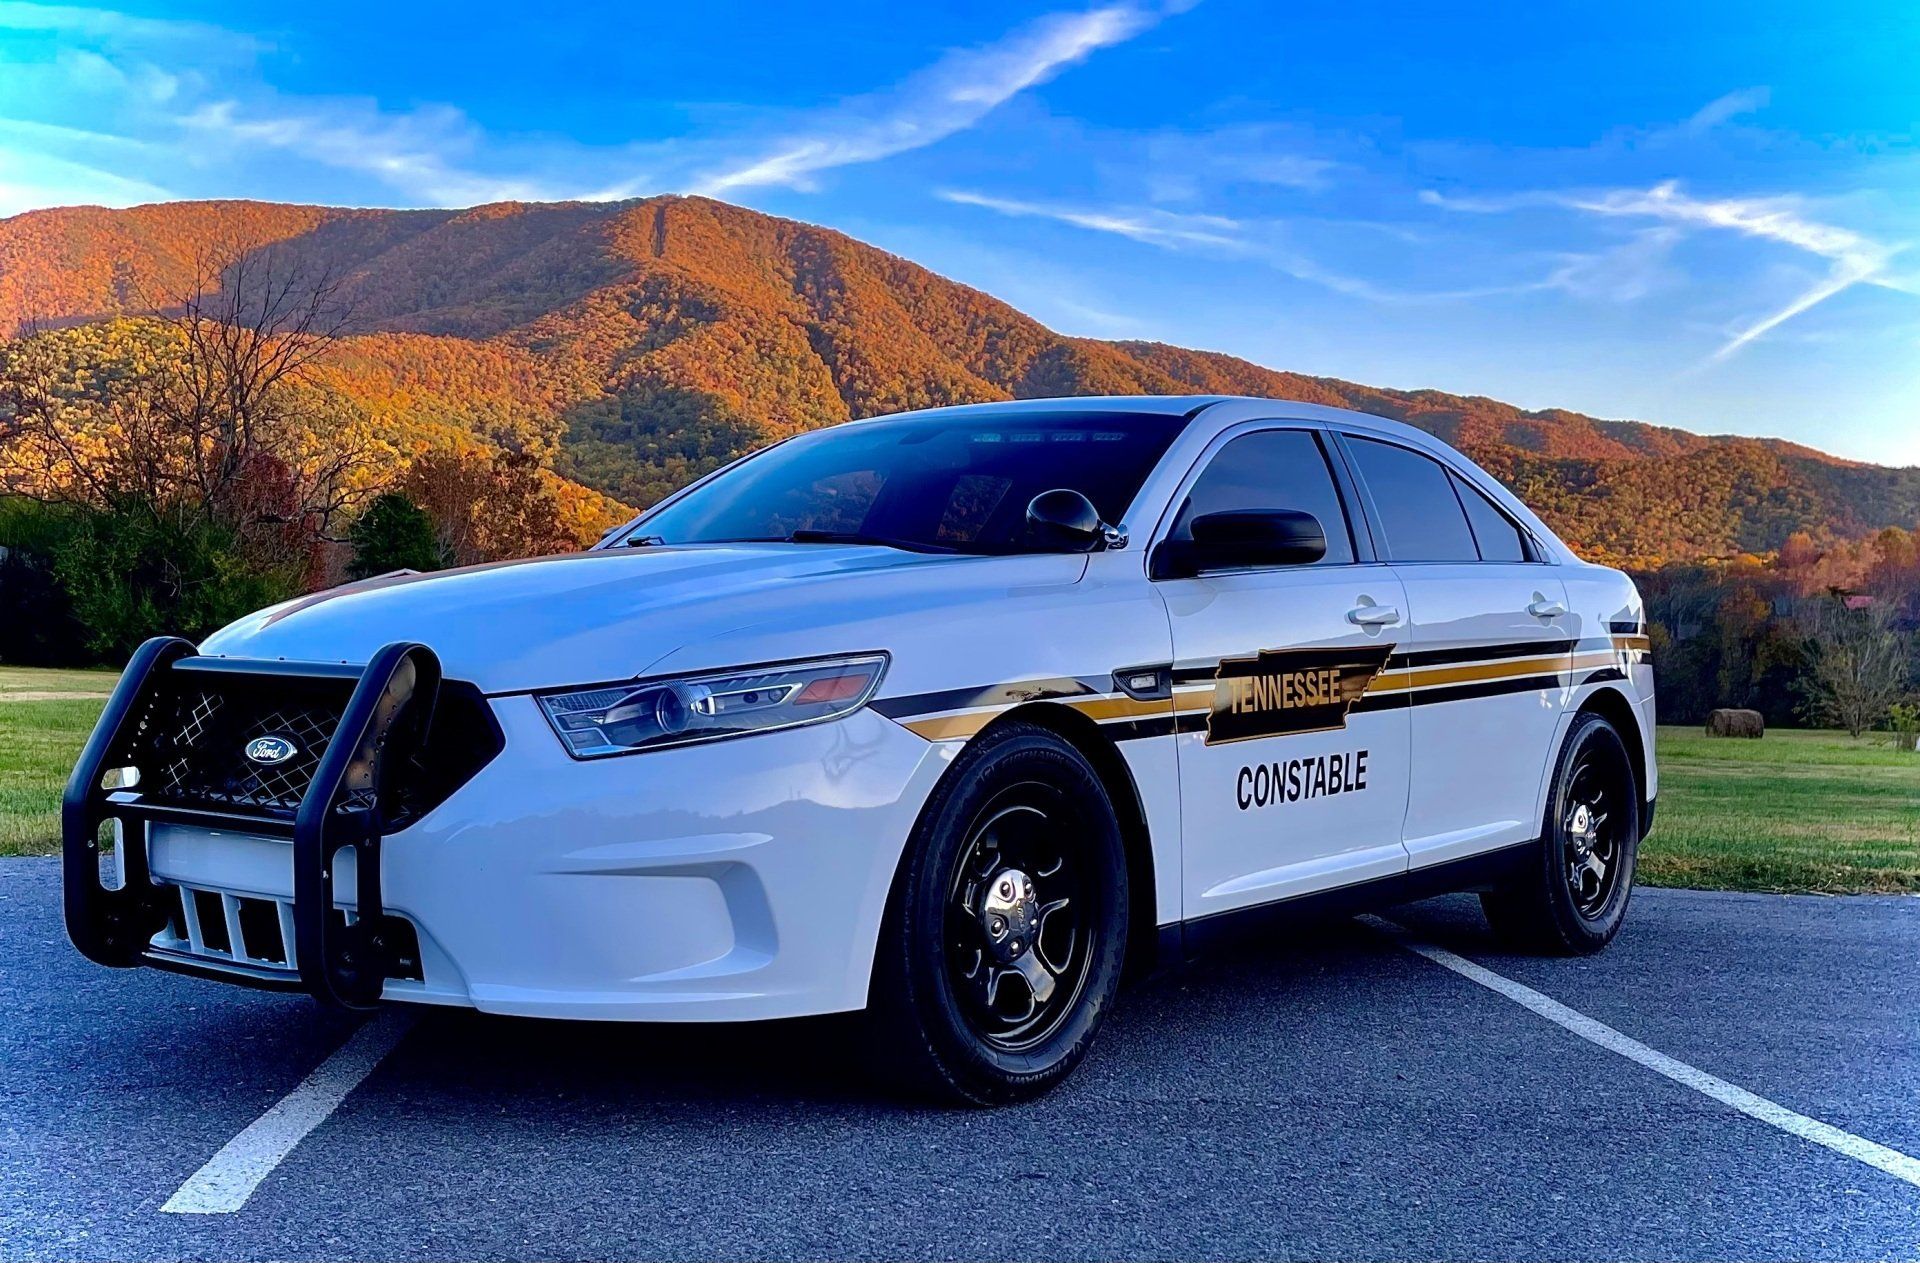 Tennessee Constable